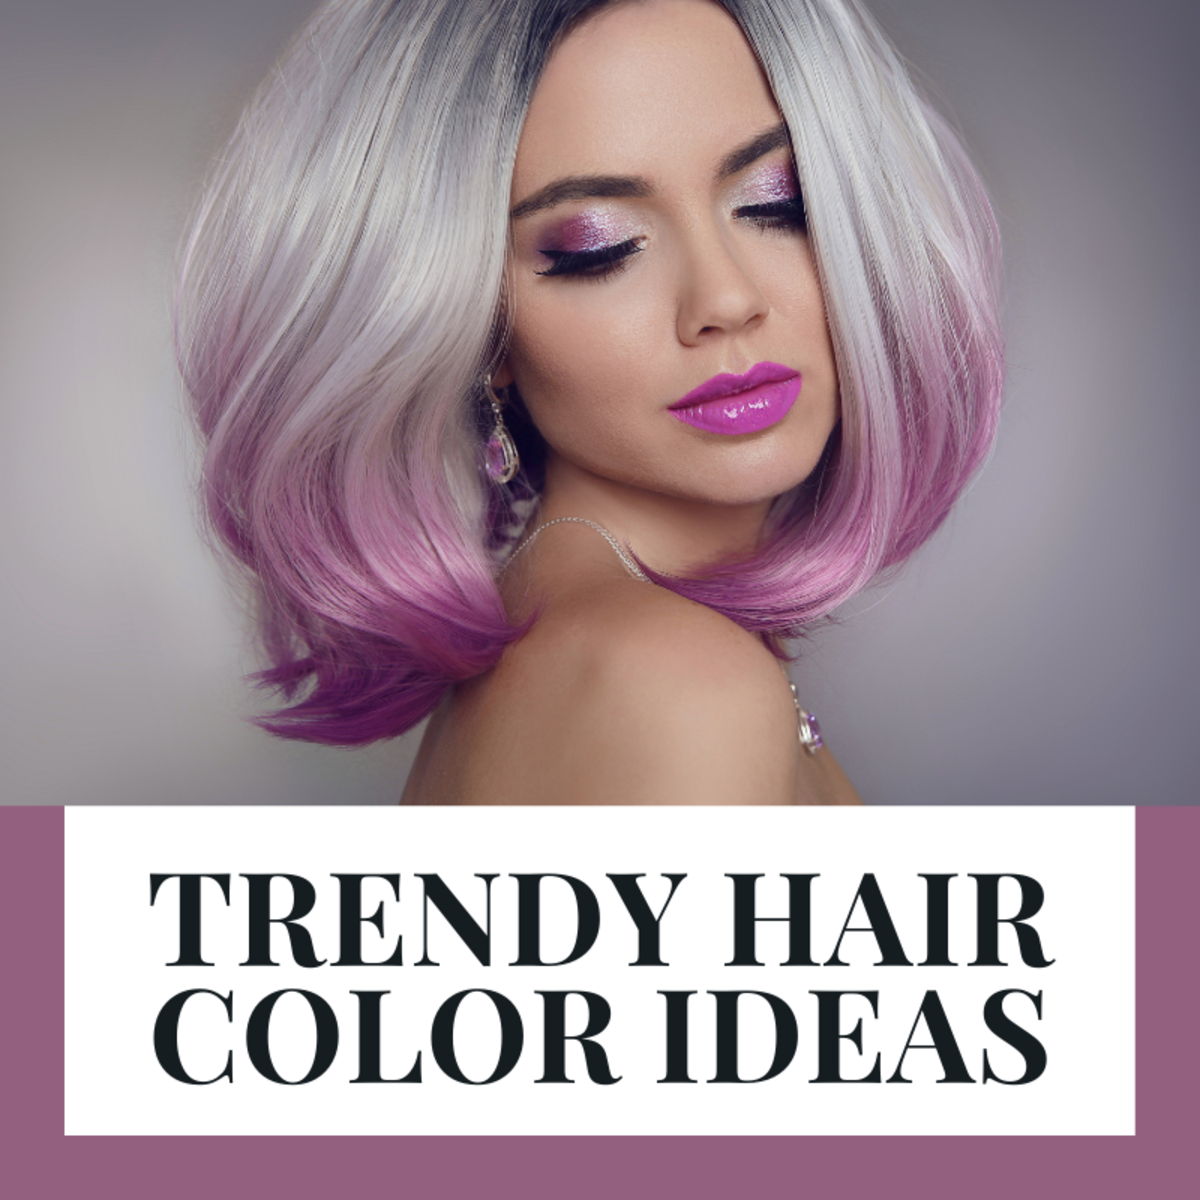 Reasons to opt for colored hair